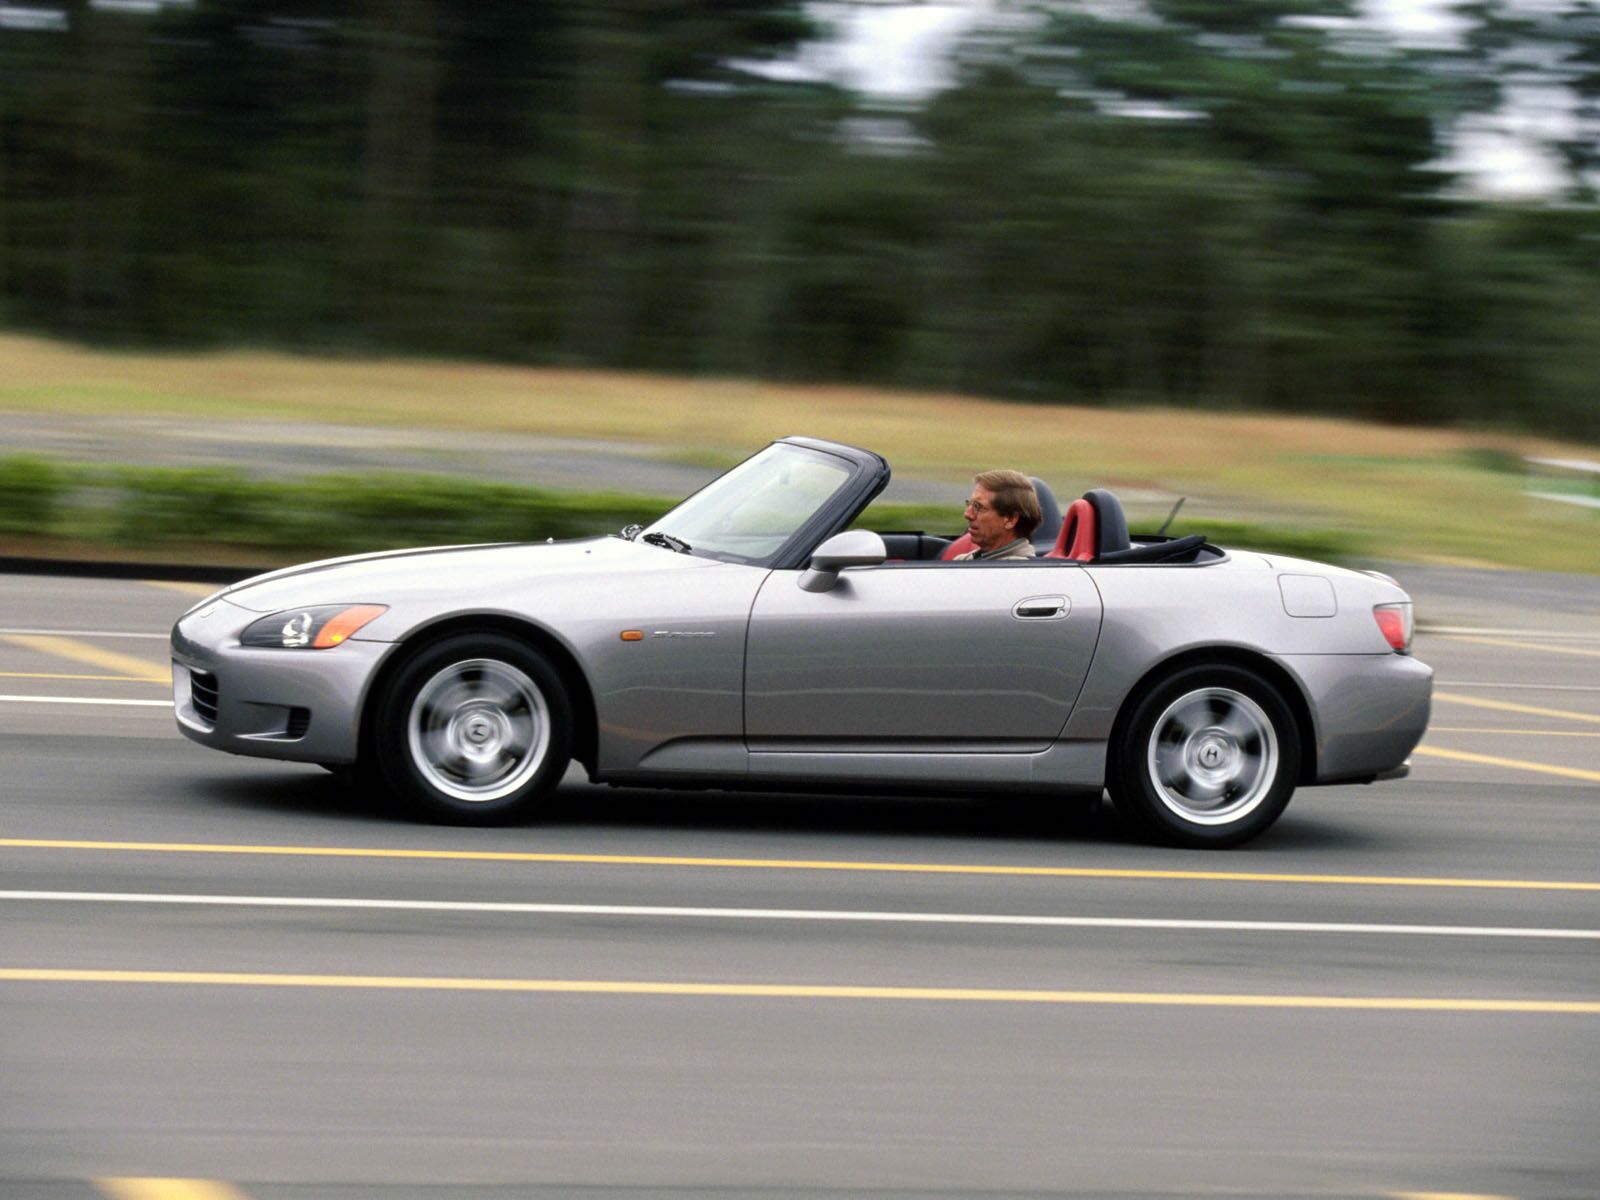 Honda s2000 picture gallery #5